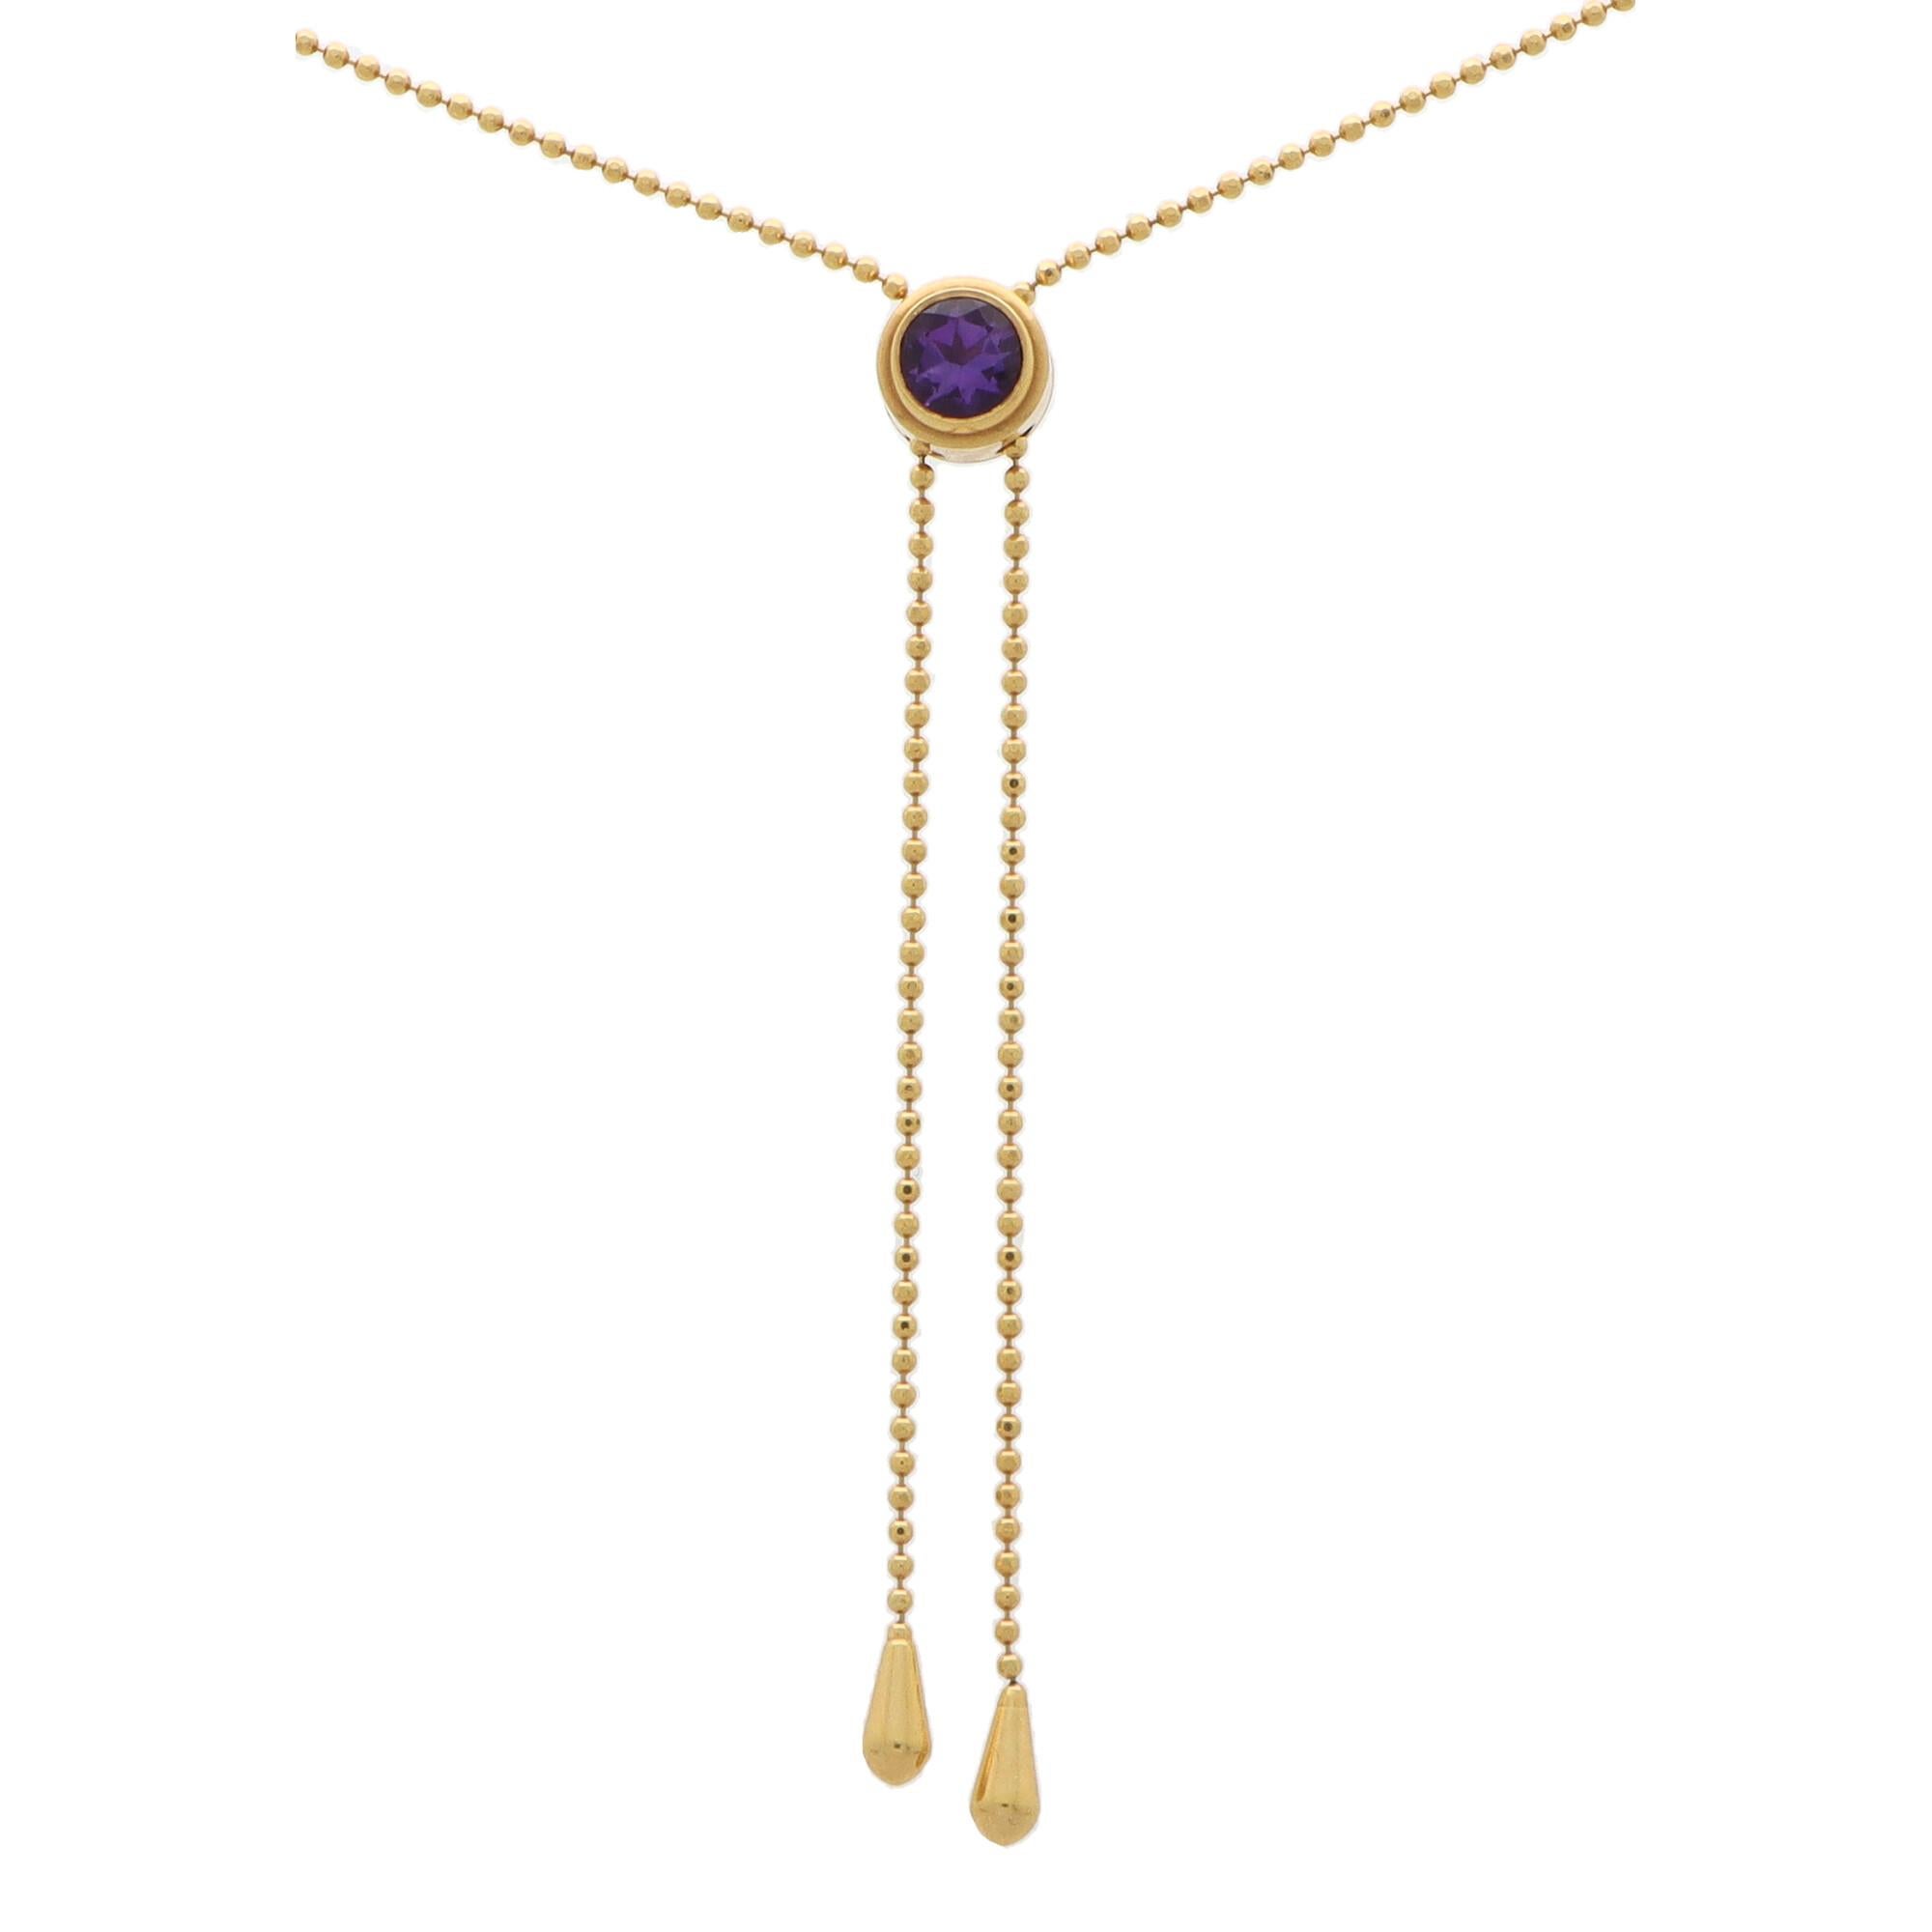 Round Cut Vintage Italian Amethyst Adjustable Tassel Necklace Set in 14k Yellow Gold For Sale